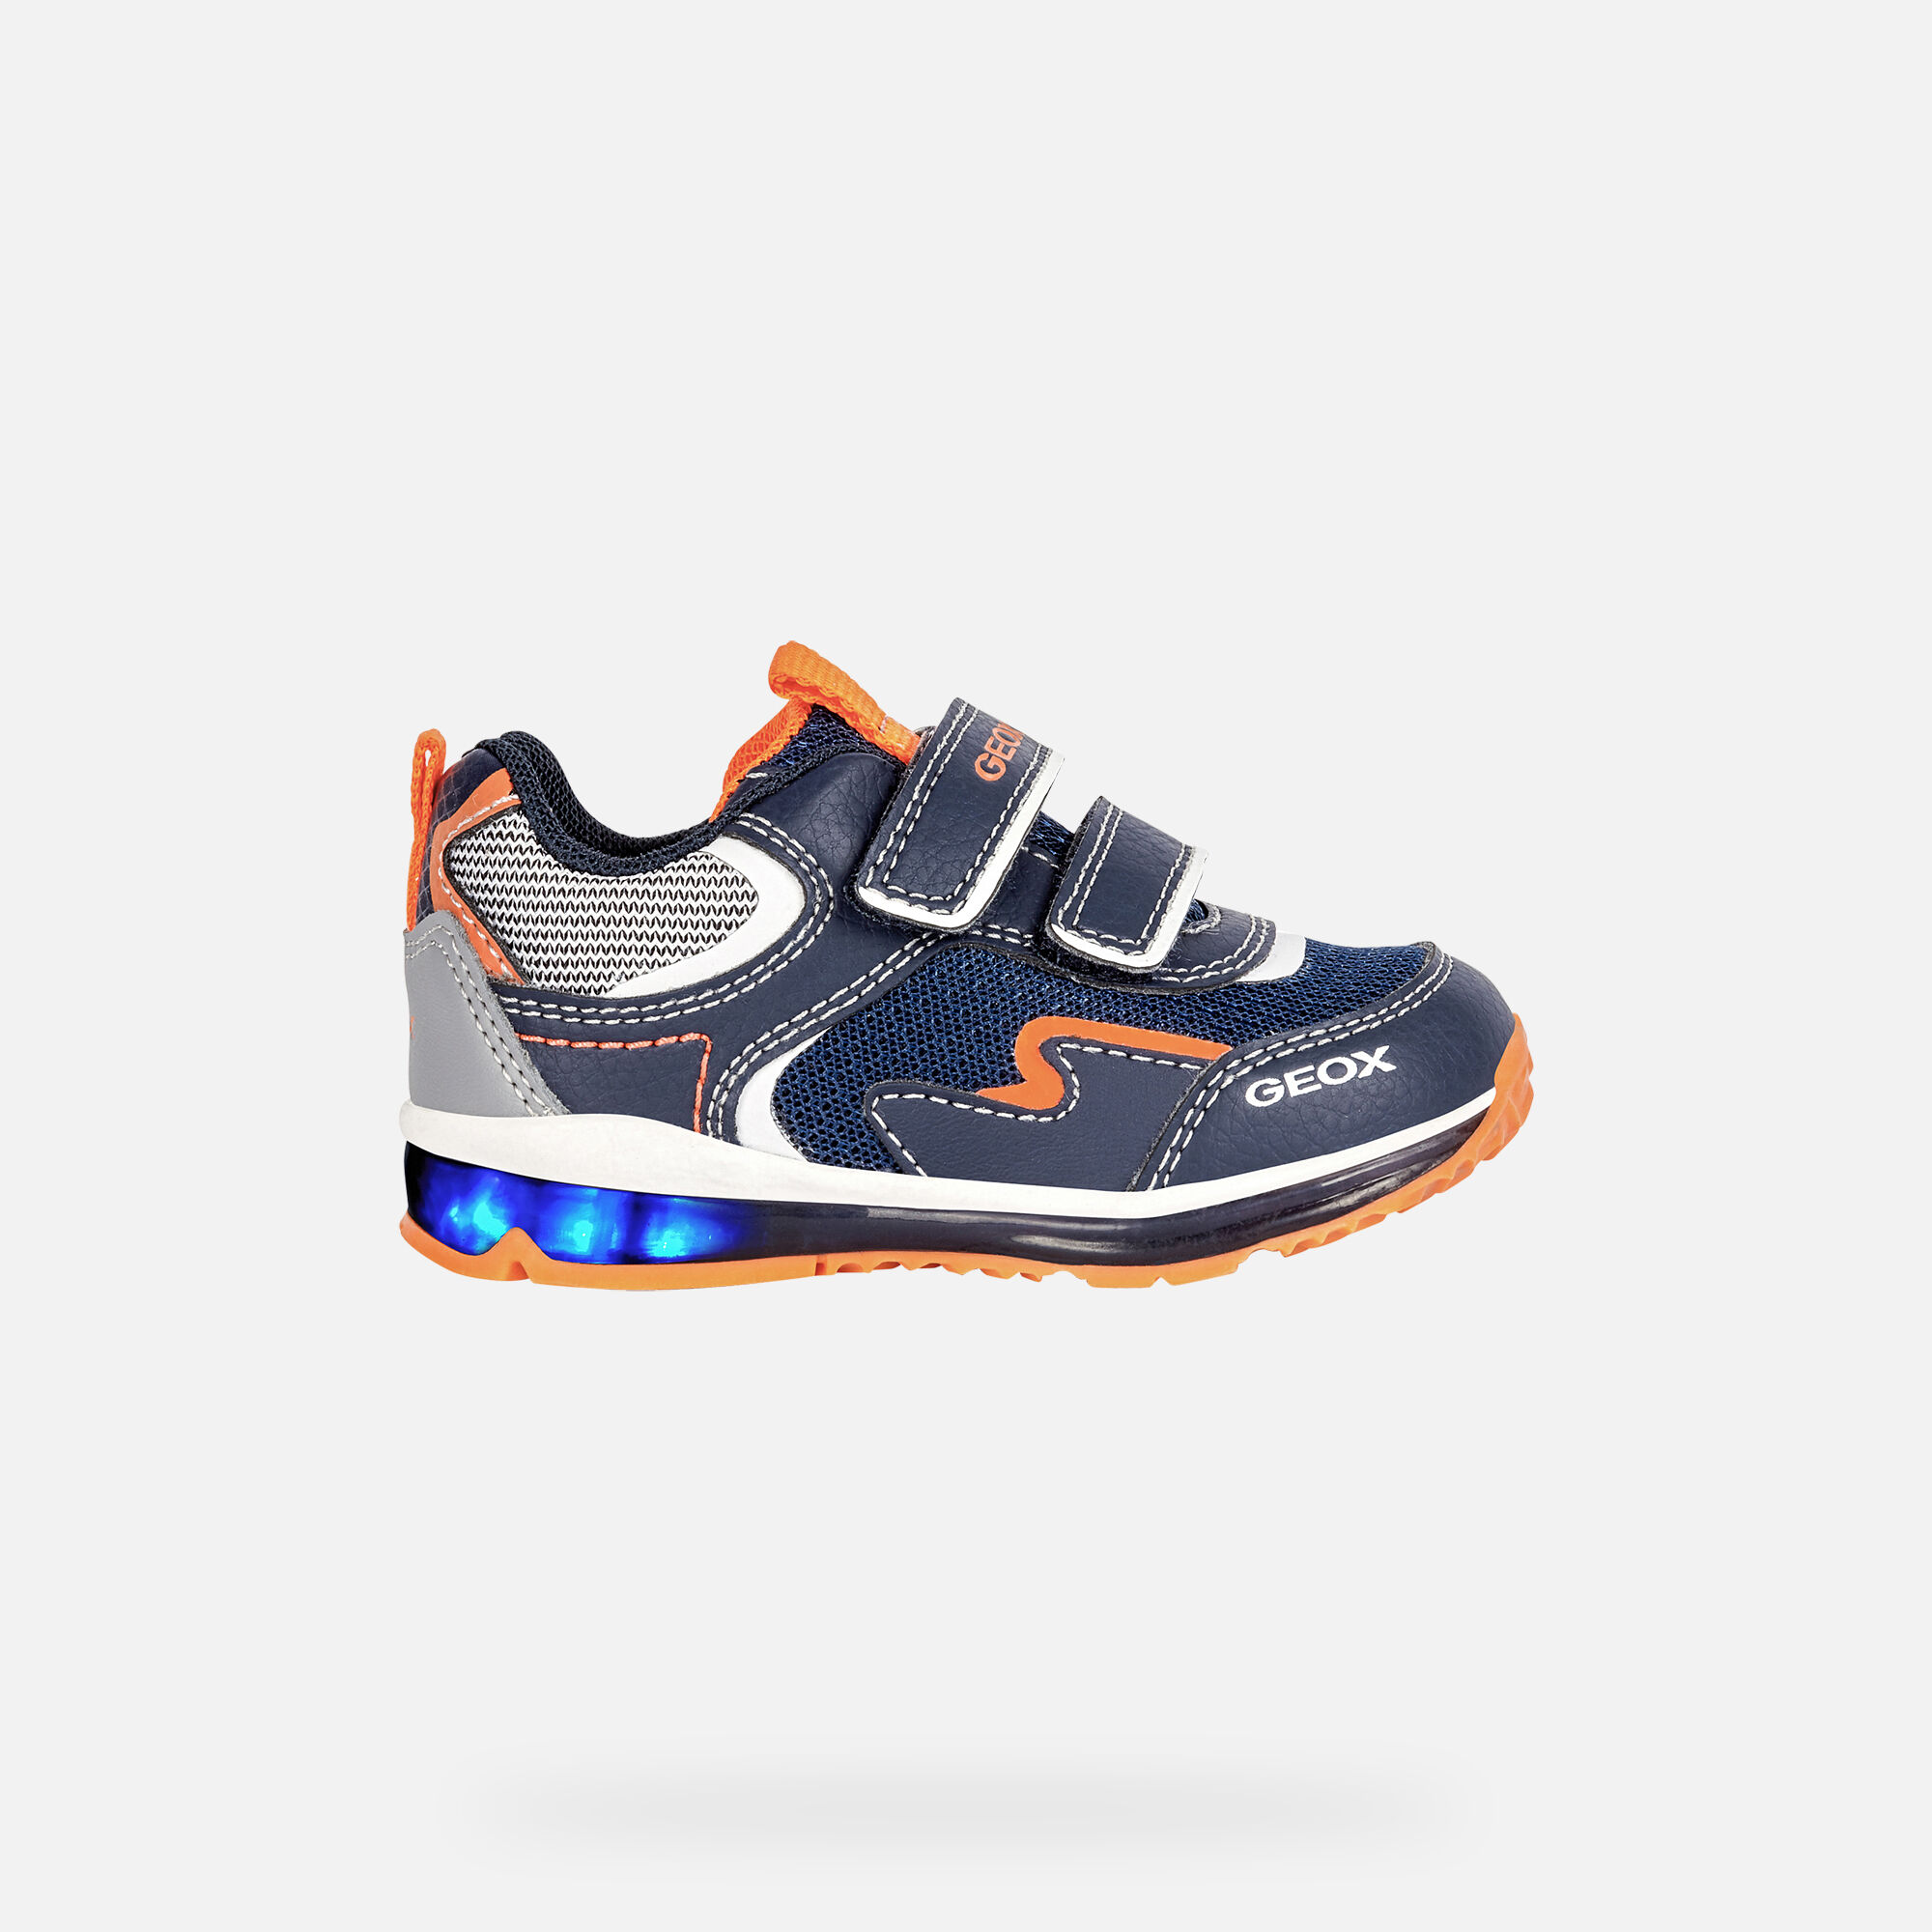 geox light up sneakers